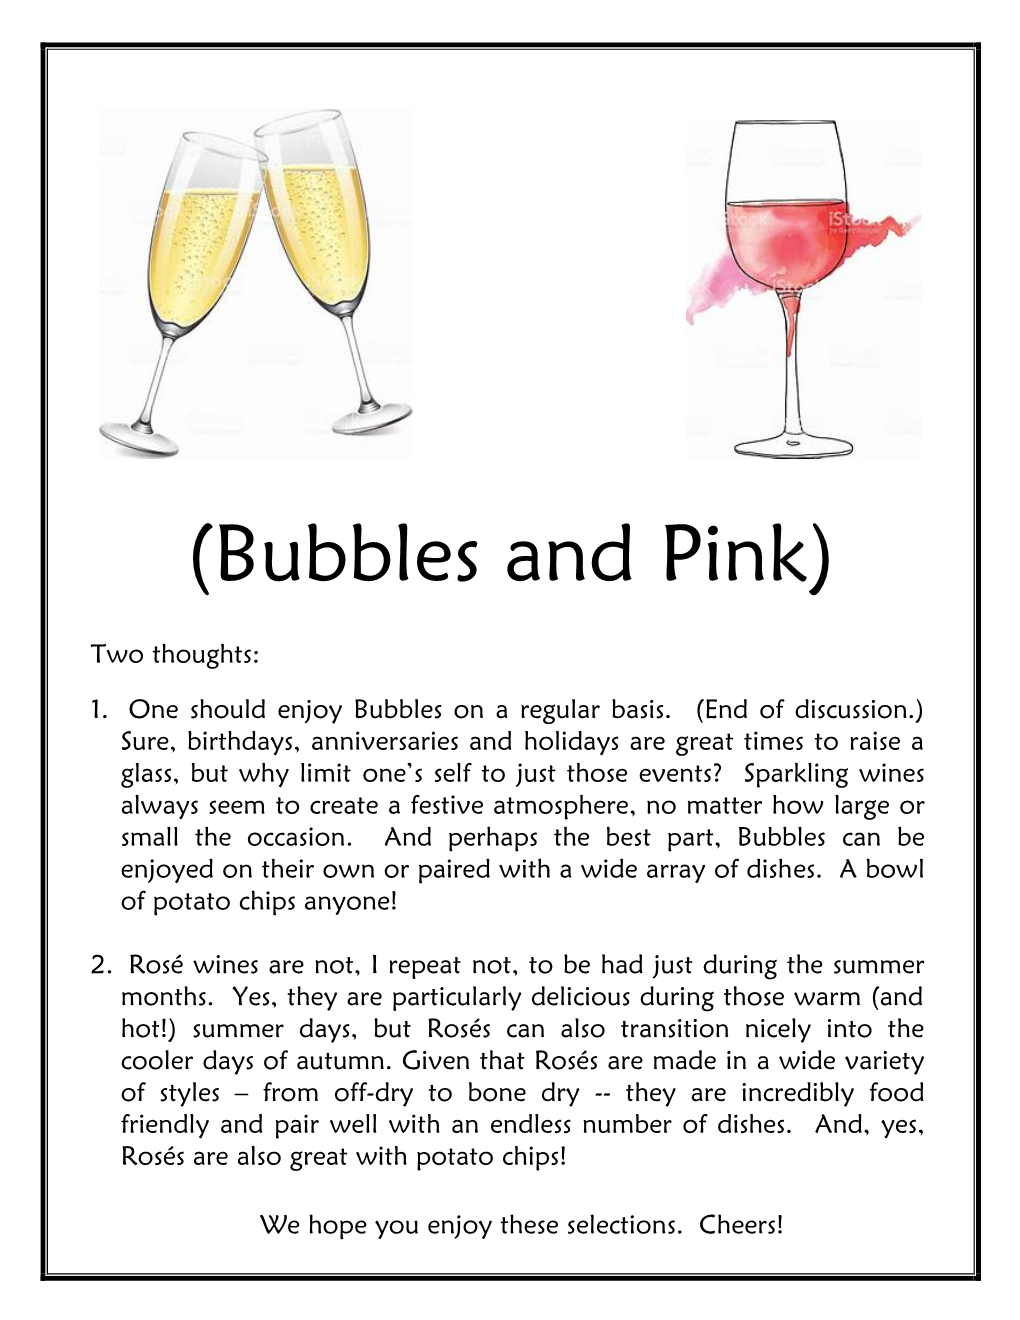 Bubbles and Pink